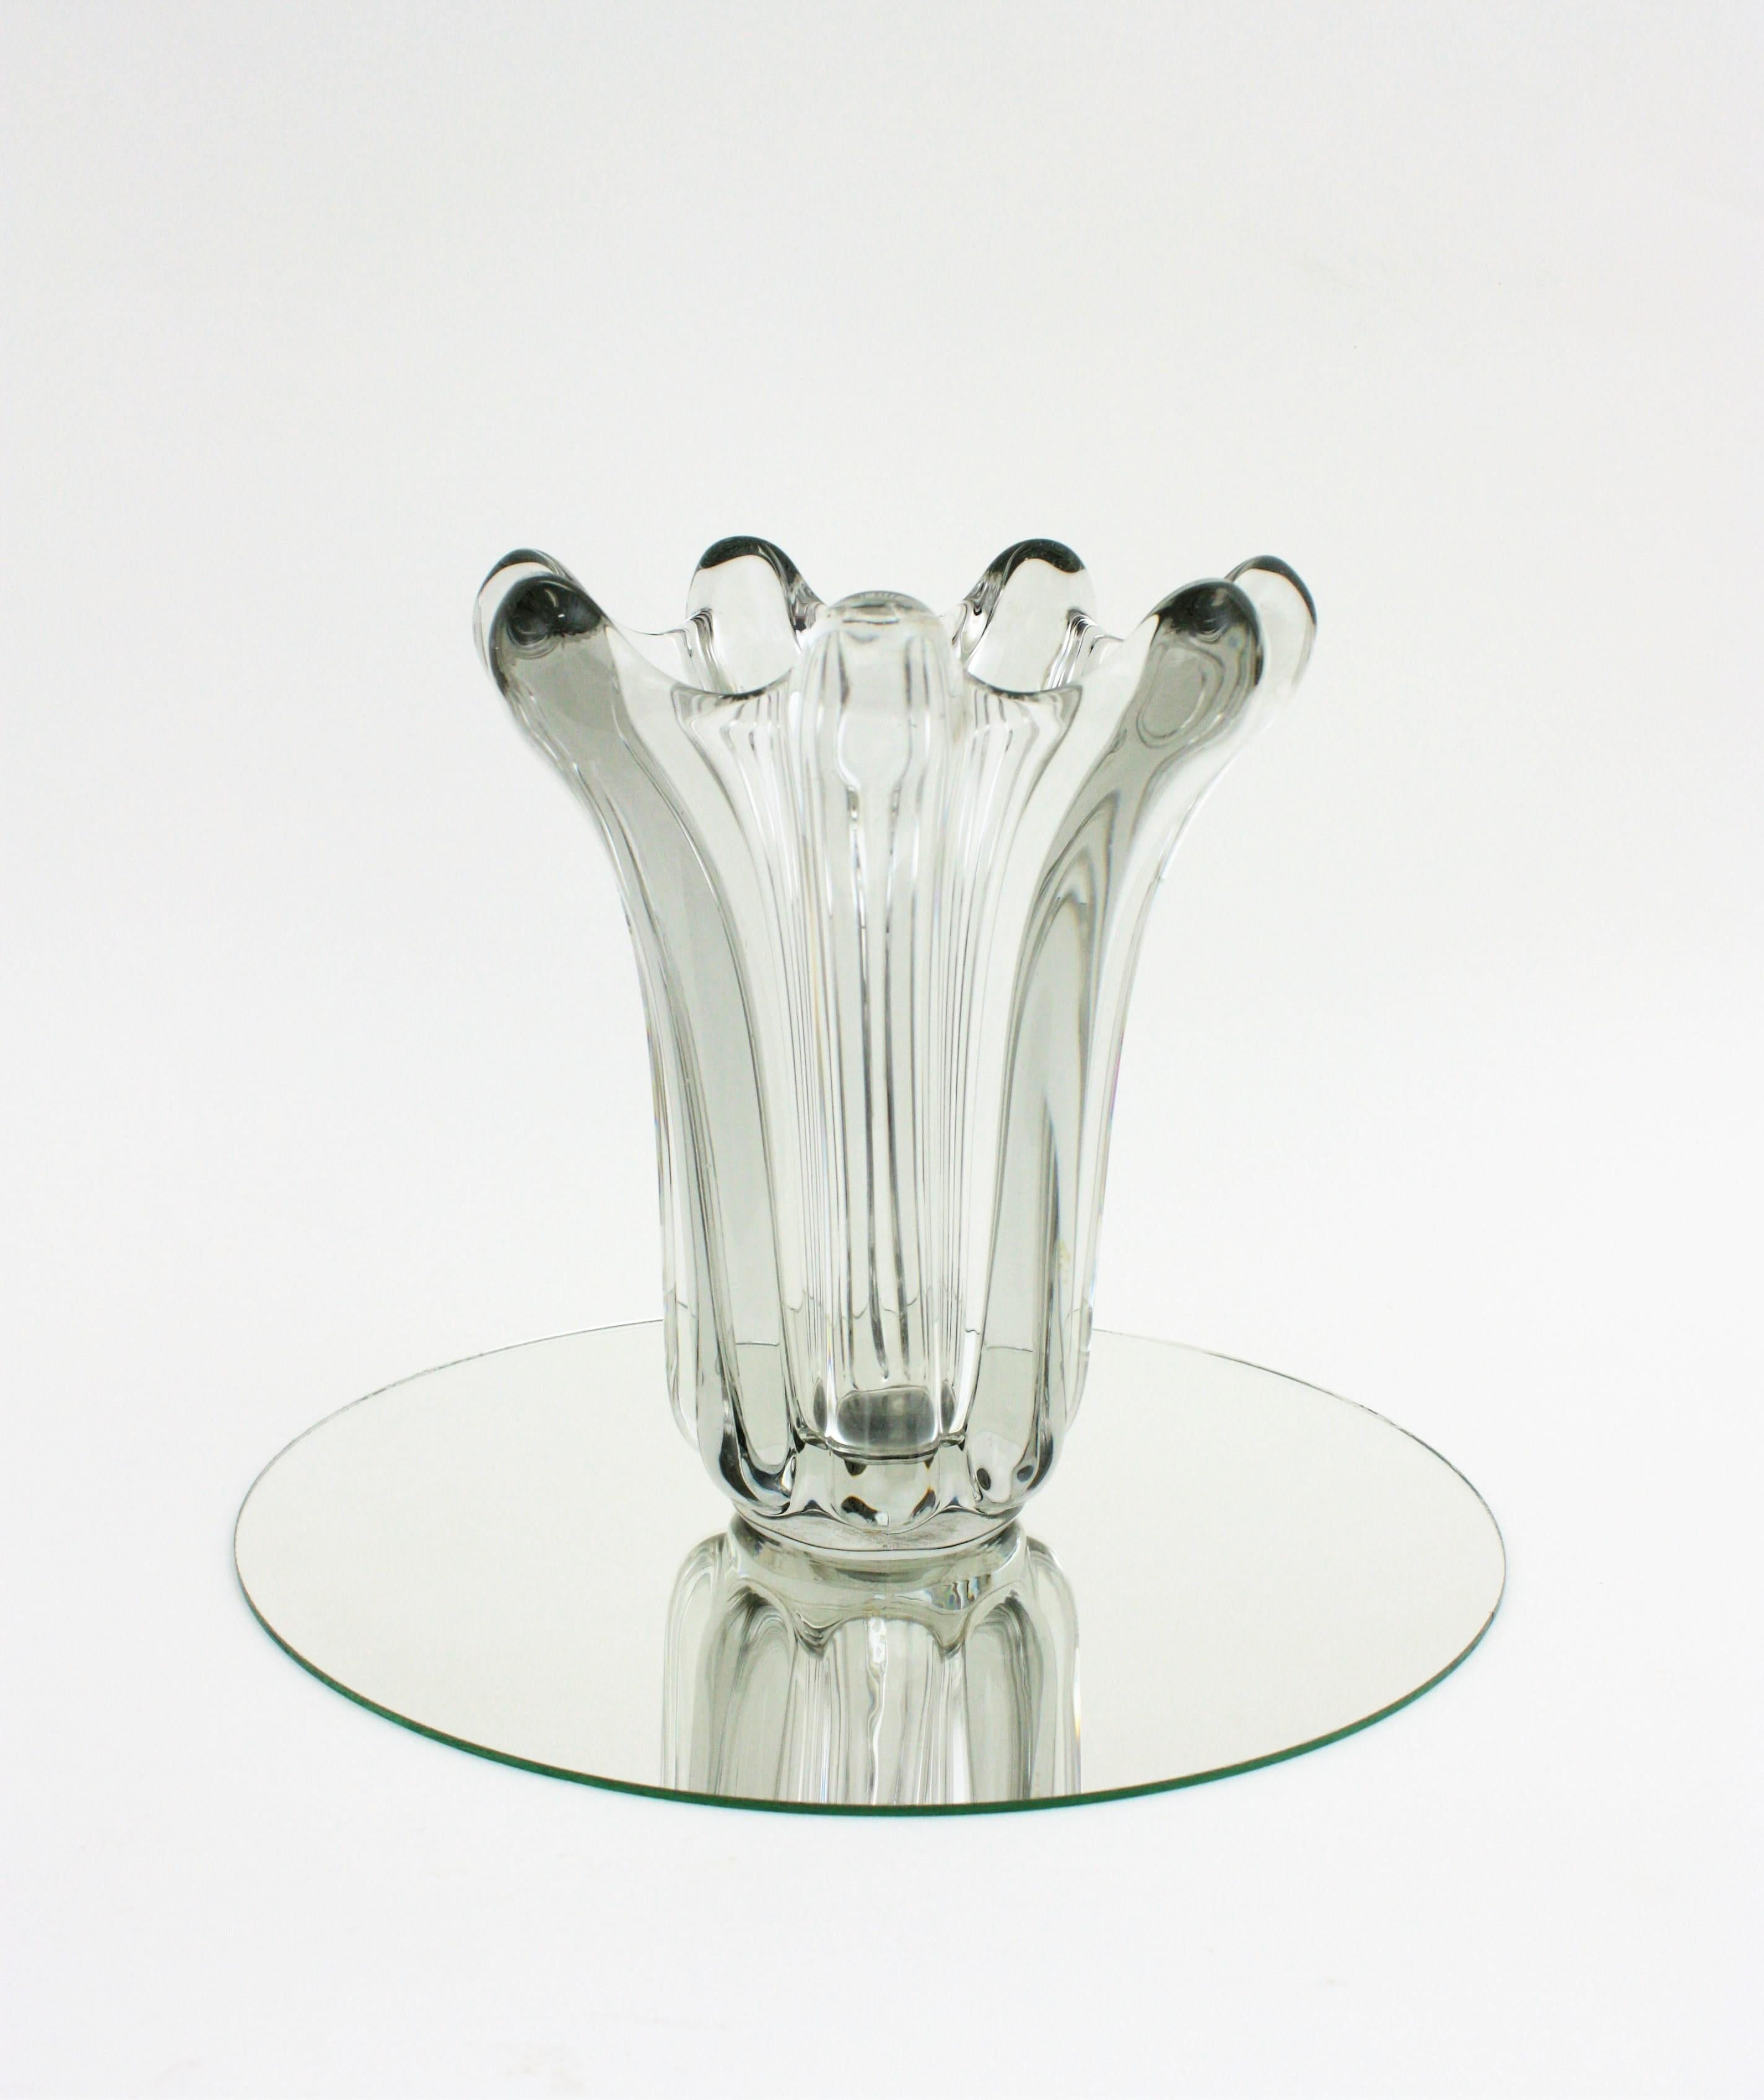 Hand-Crafted Flavio Poli Seguso Murano Clear Pulled Art Glass Vase For Sale